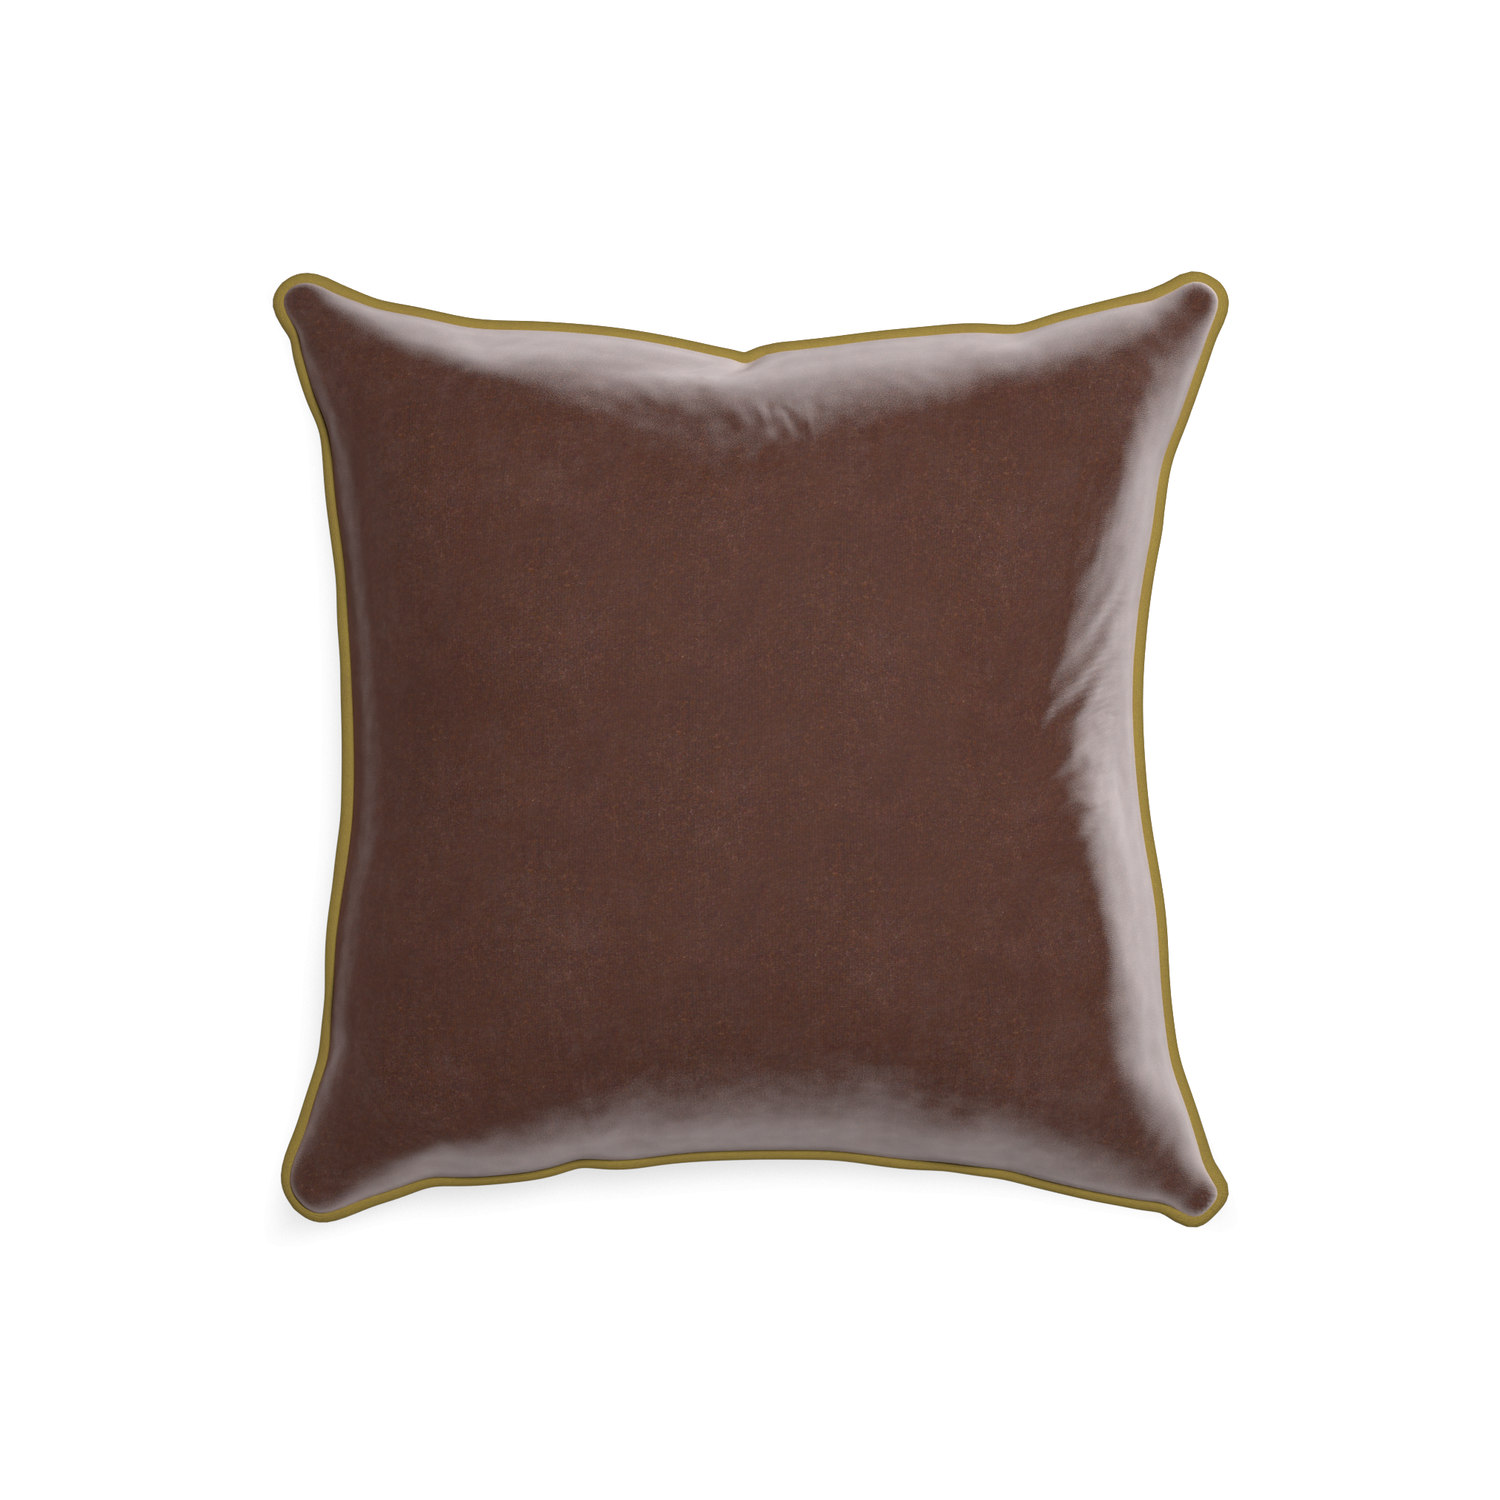 20-square walnut velvet custom brownpillow with c piping on white background